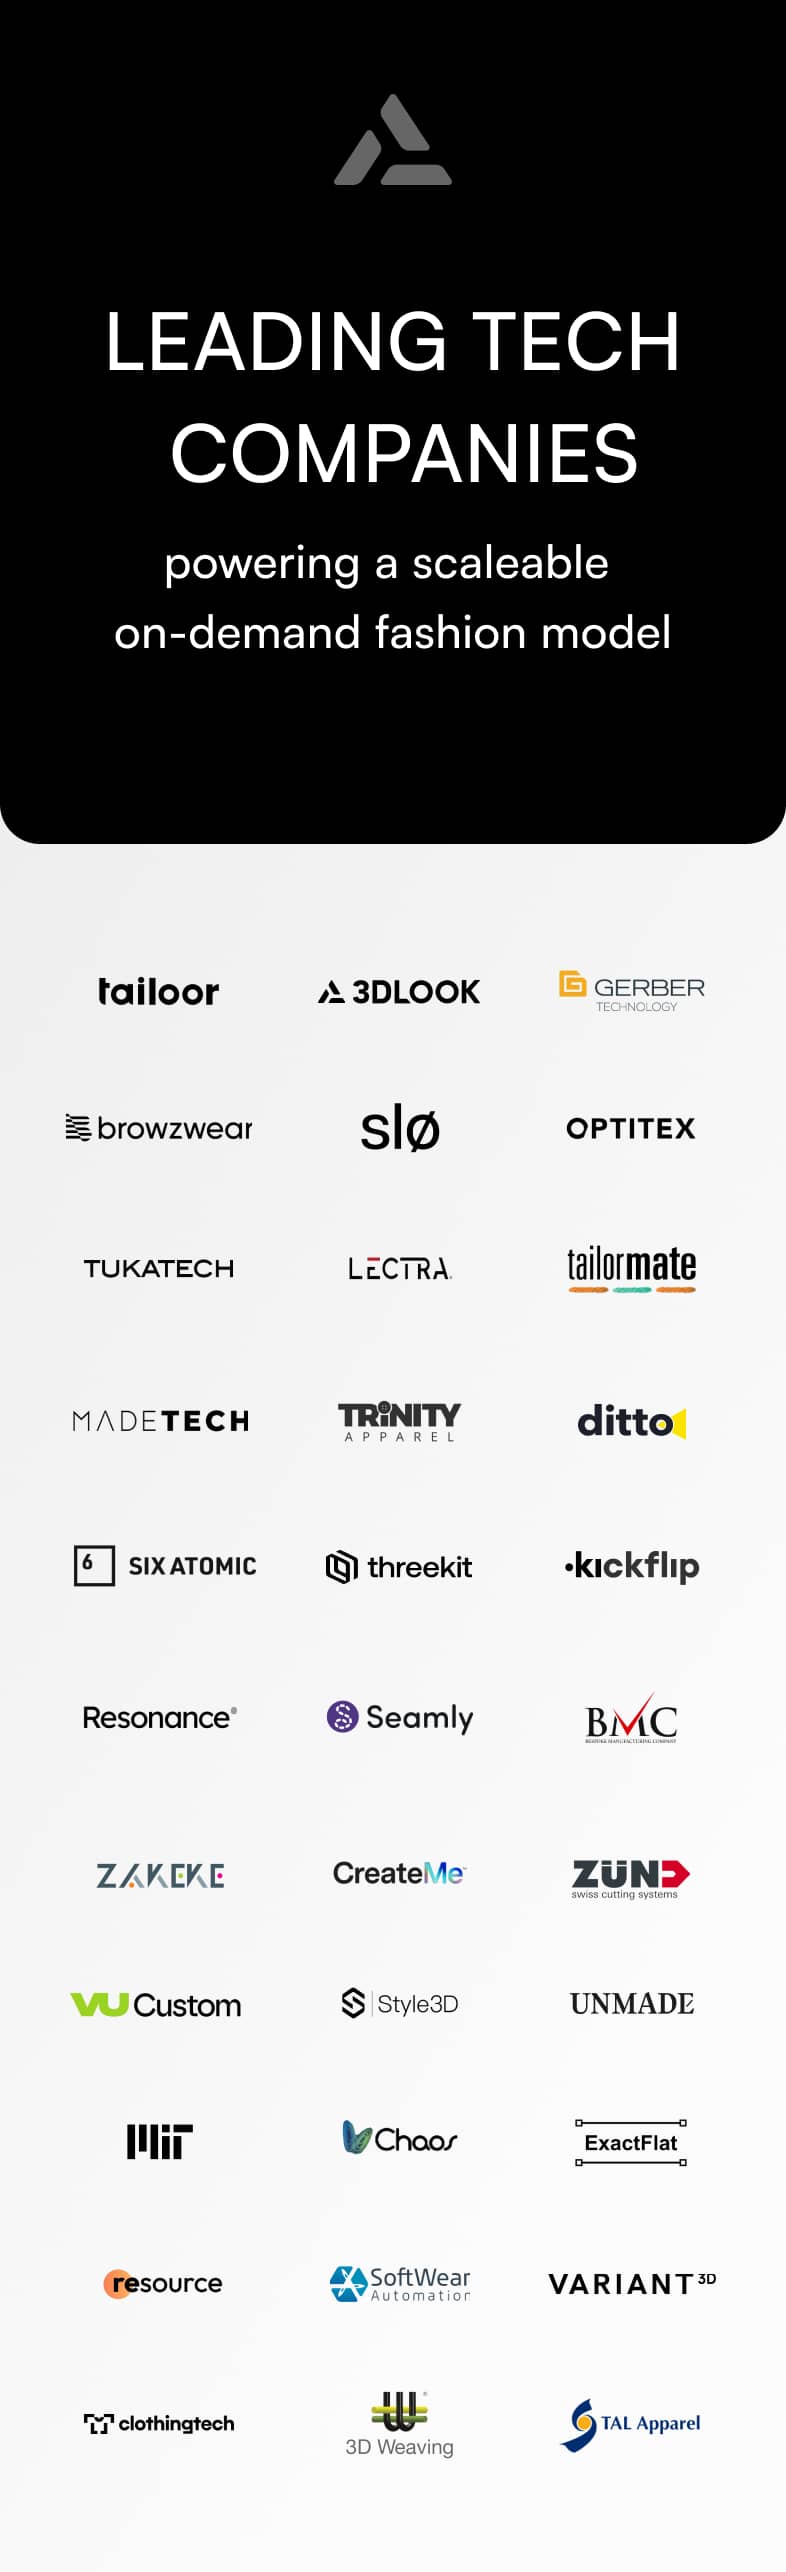 A showcase of logos from leading tech companies shaping the 2024 on-demand fashion landscape, including taillor, 3DLOOK, GEFERTEC, browzwear, and others.